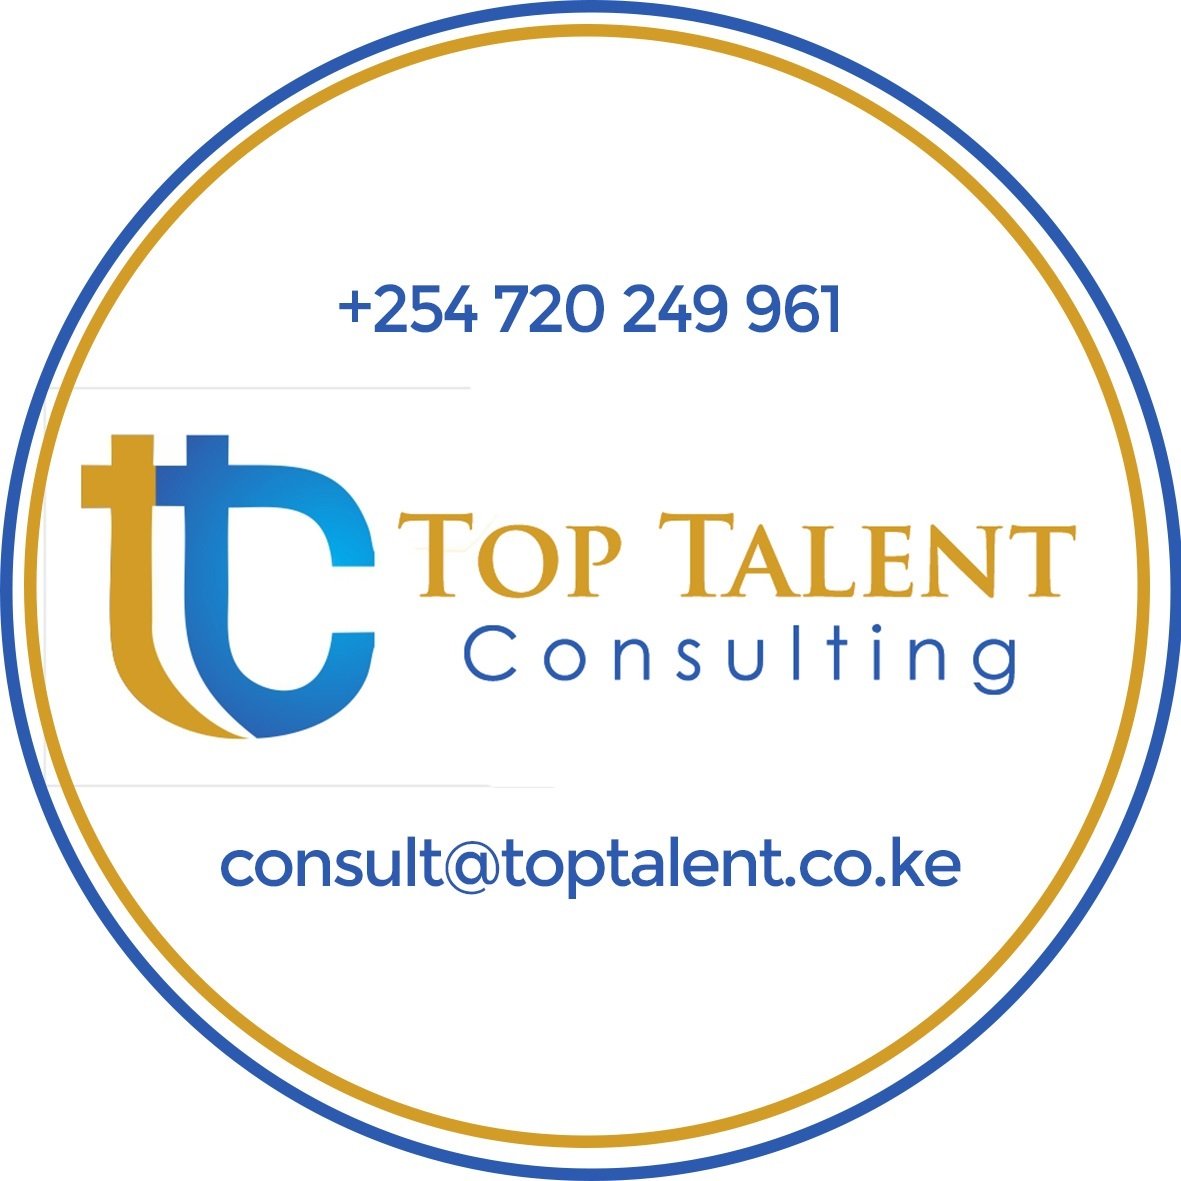 Top Talent is a Training and Consulting company with competencies in training development and delivery.